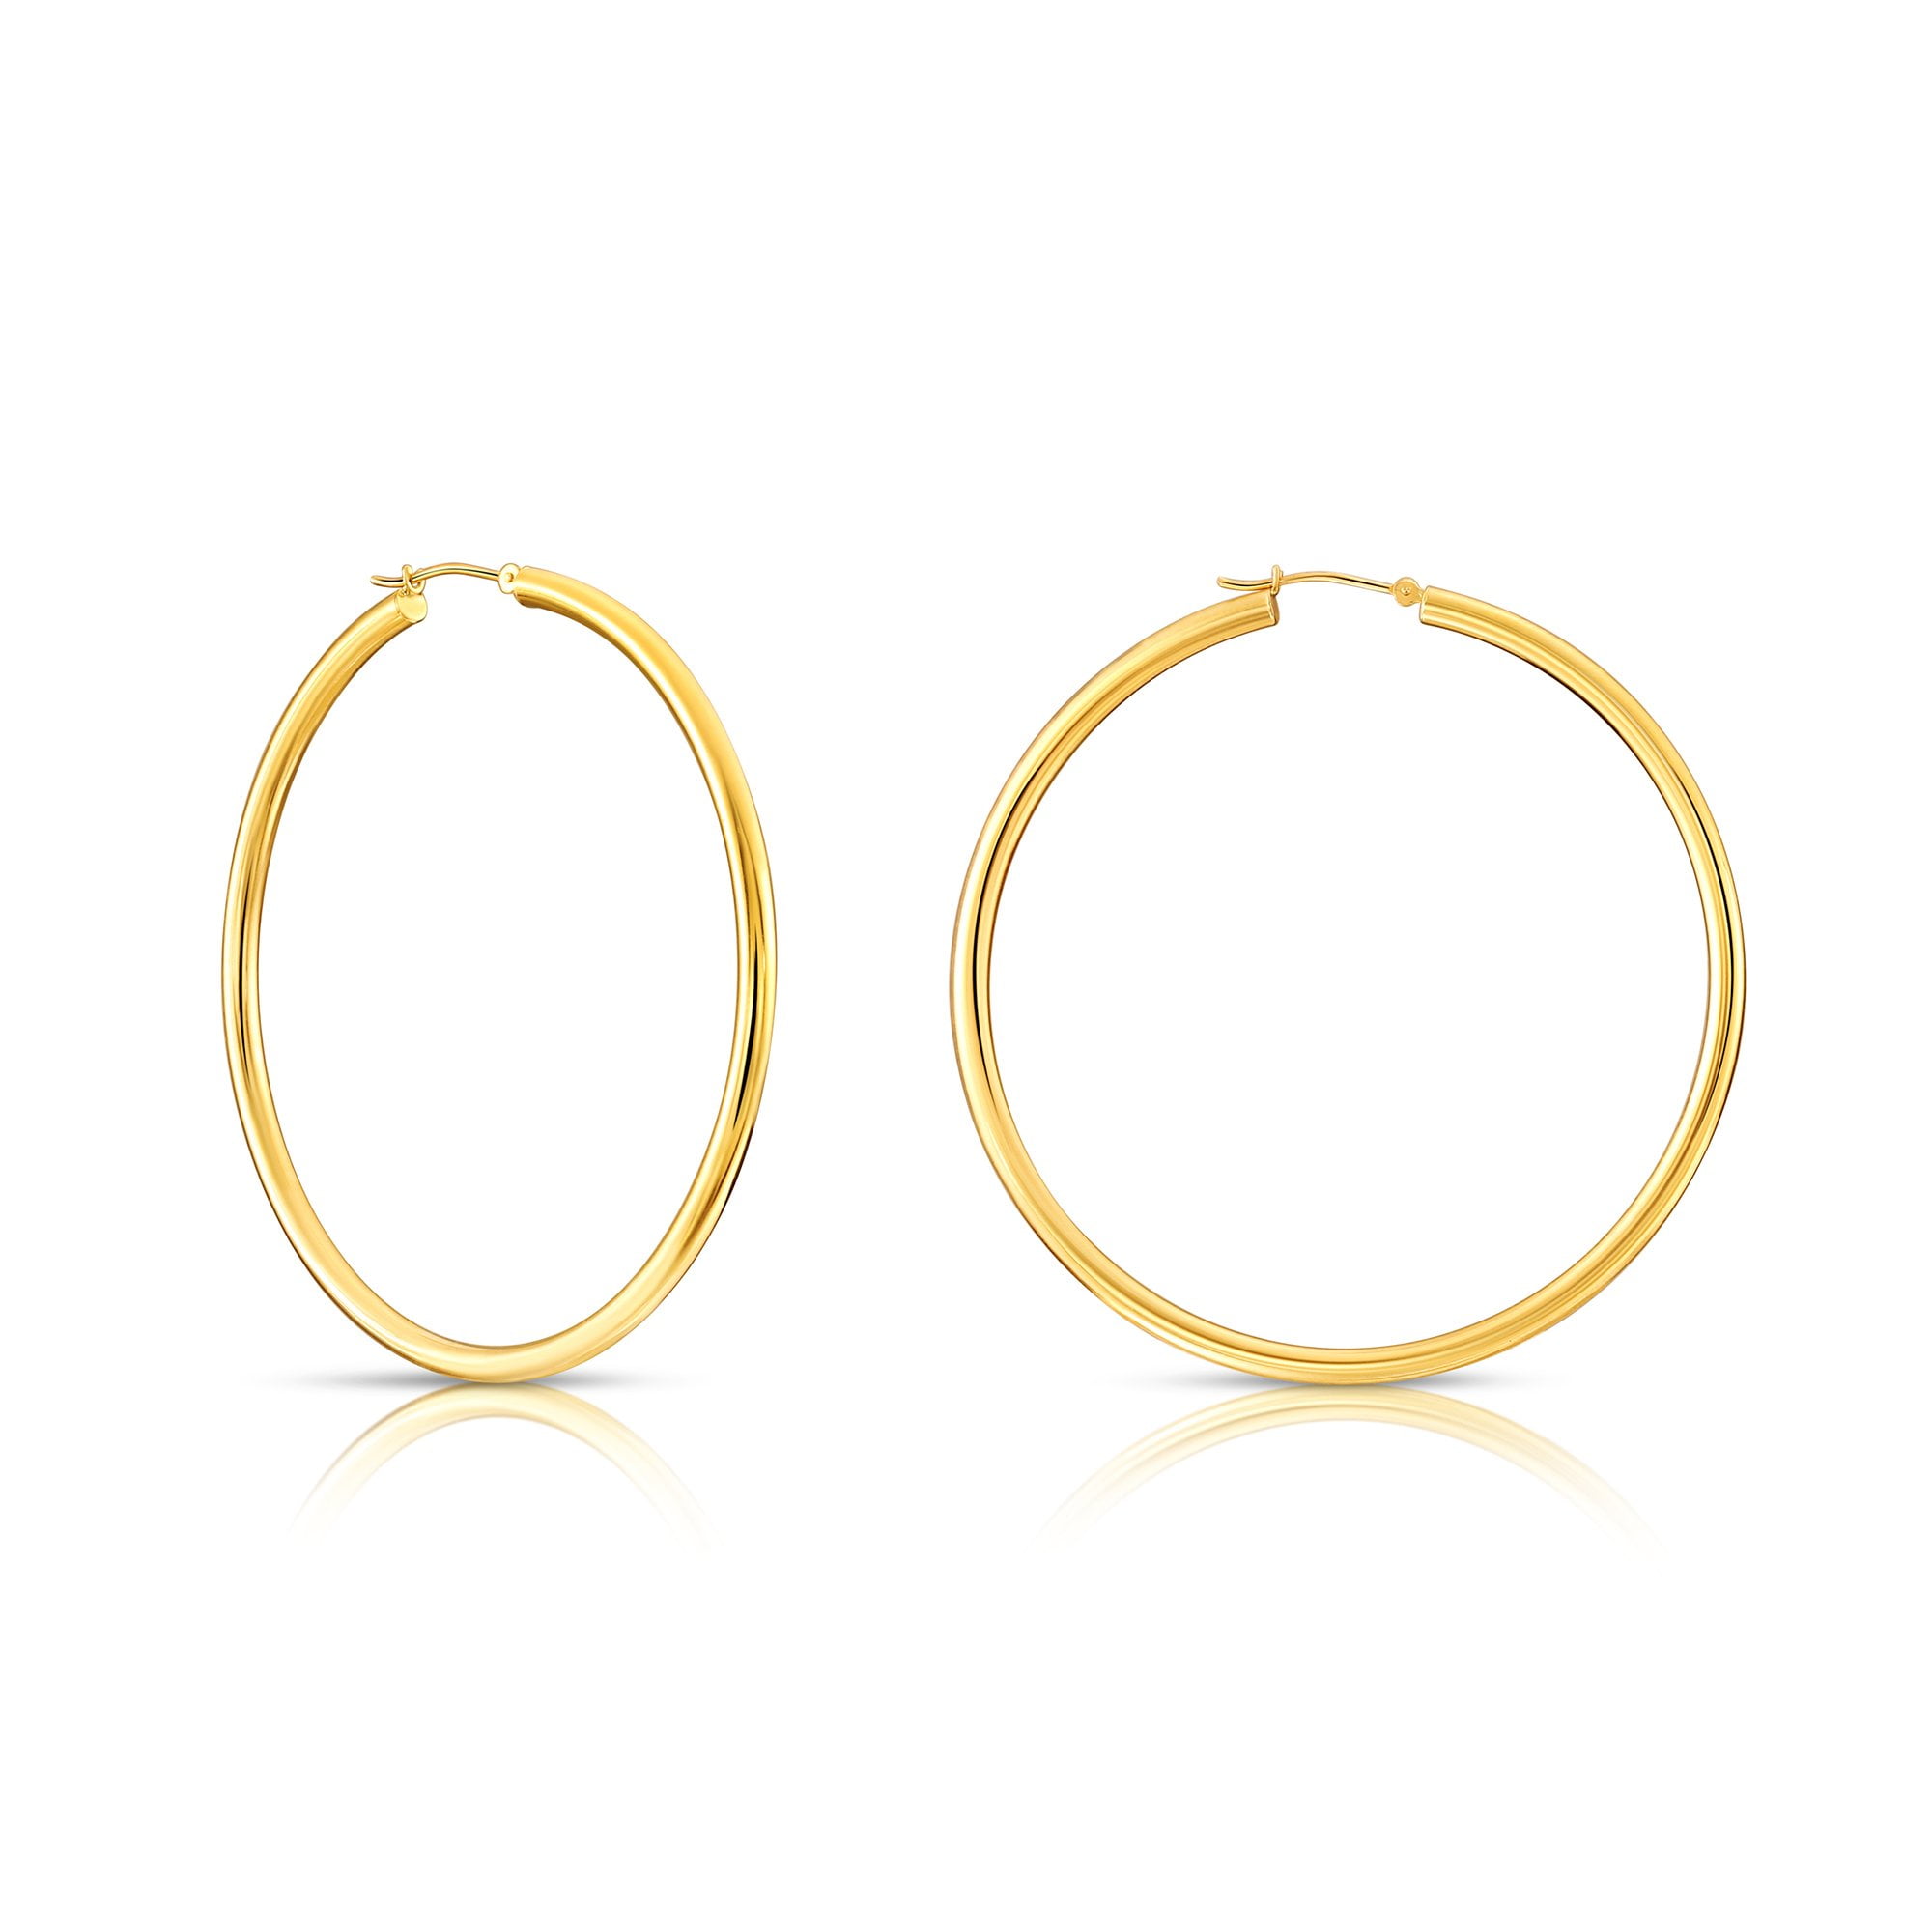 14K Real Solid Yellow Gold Classic Polished Round Hoop Earrings 2.5mm Tube Hoops